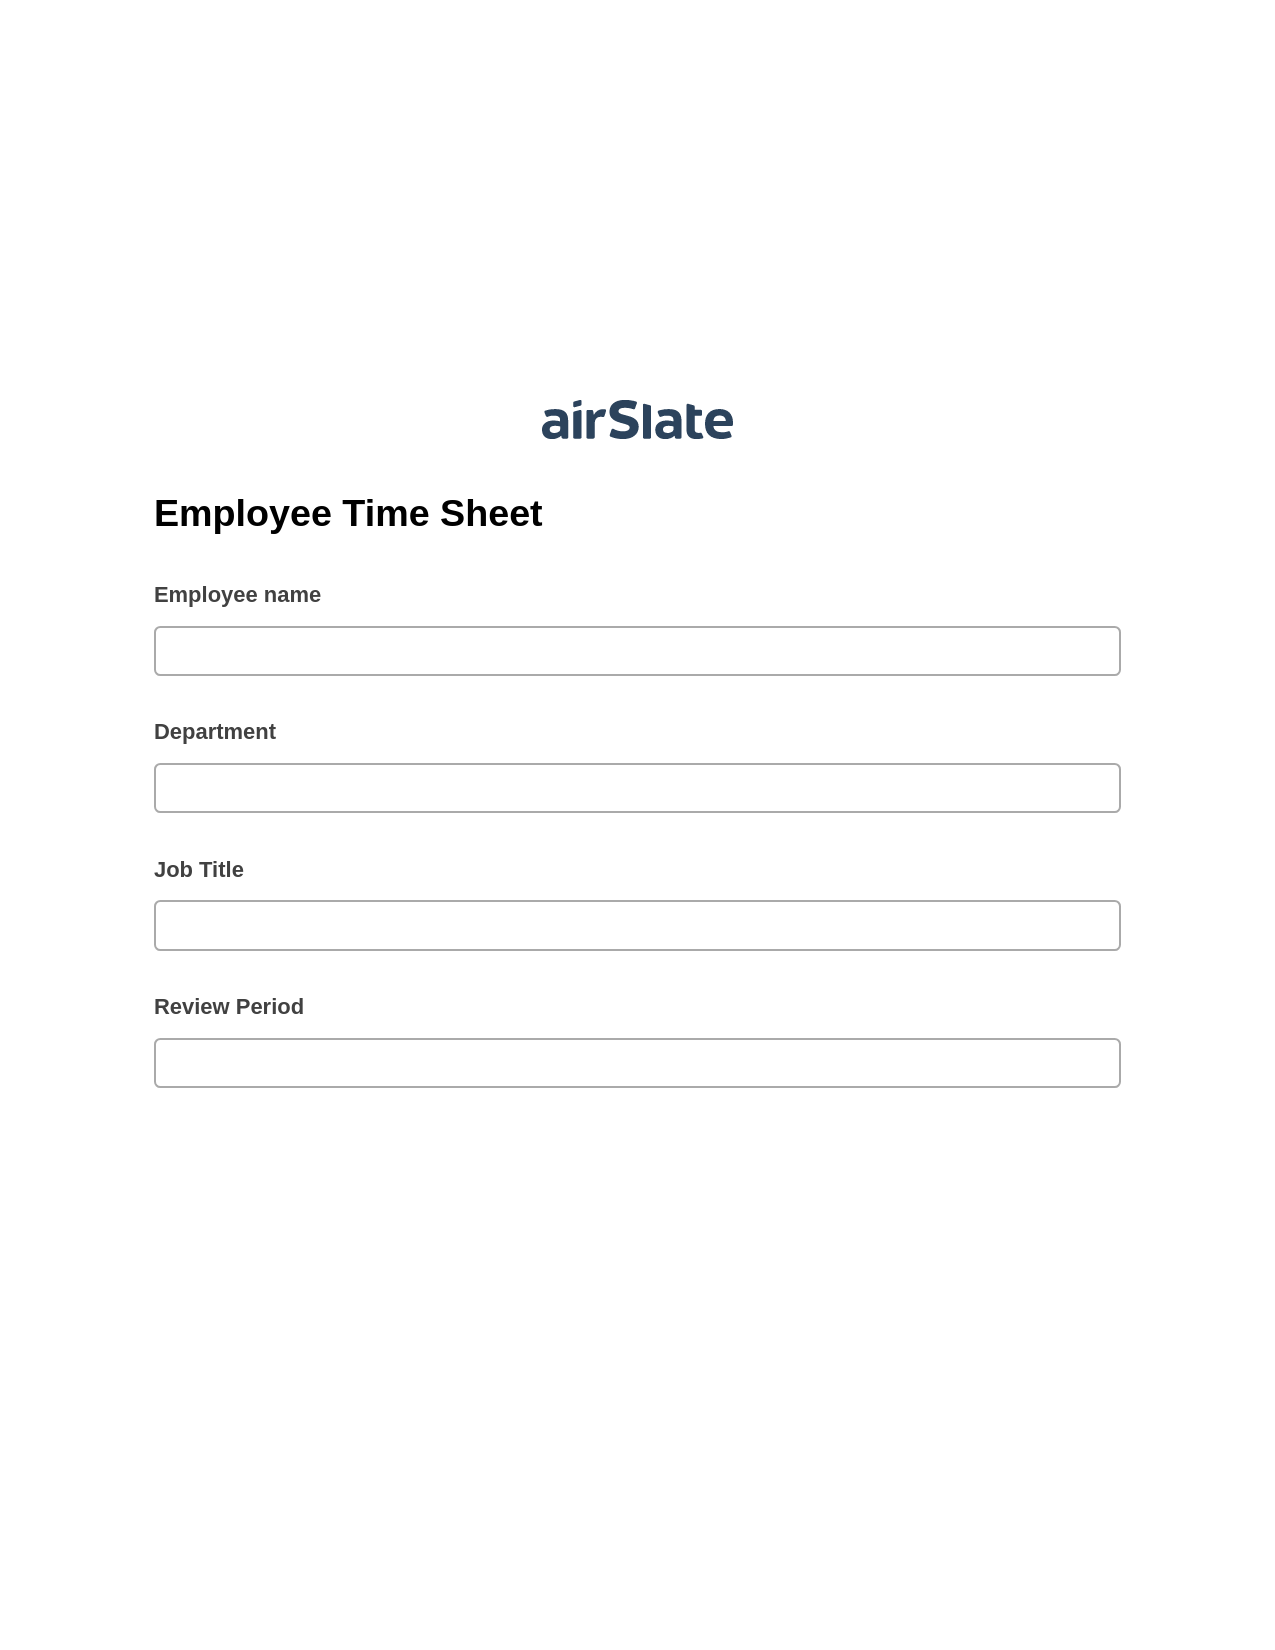 Multirole Employee Time Sheet Pre-fill from MS Dynamics 365 Records, Create slate from another Flow Bot, Webhook Postfinish Bot